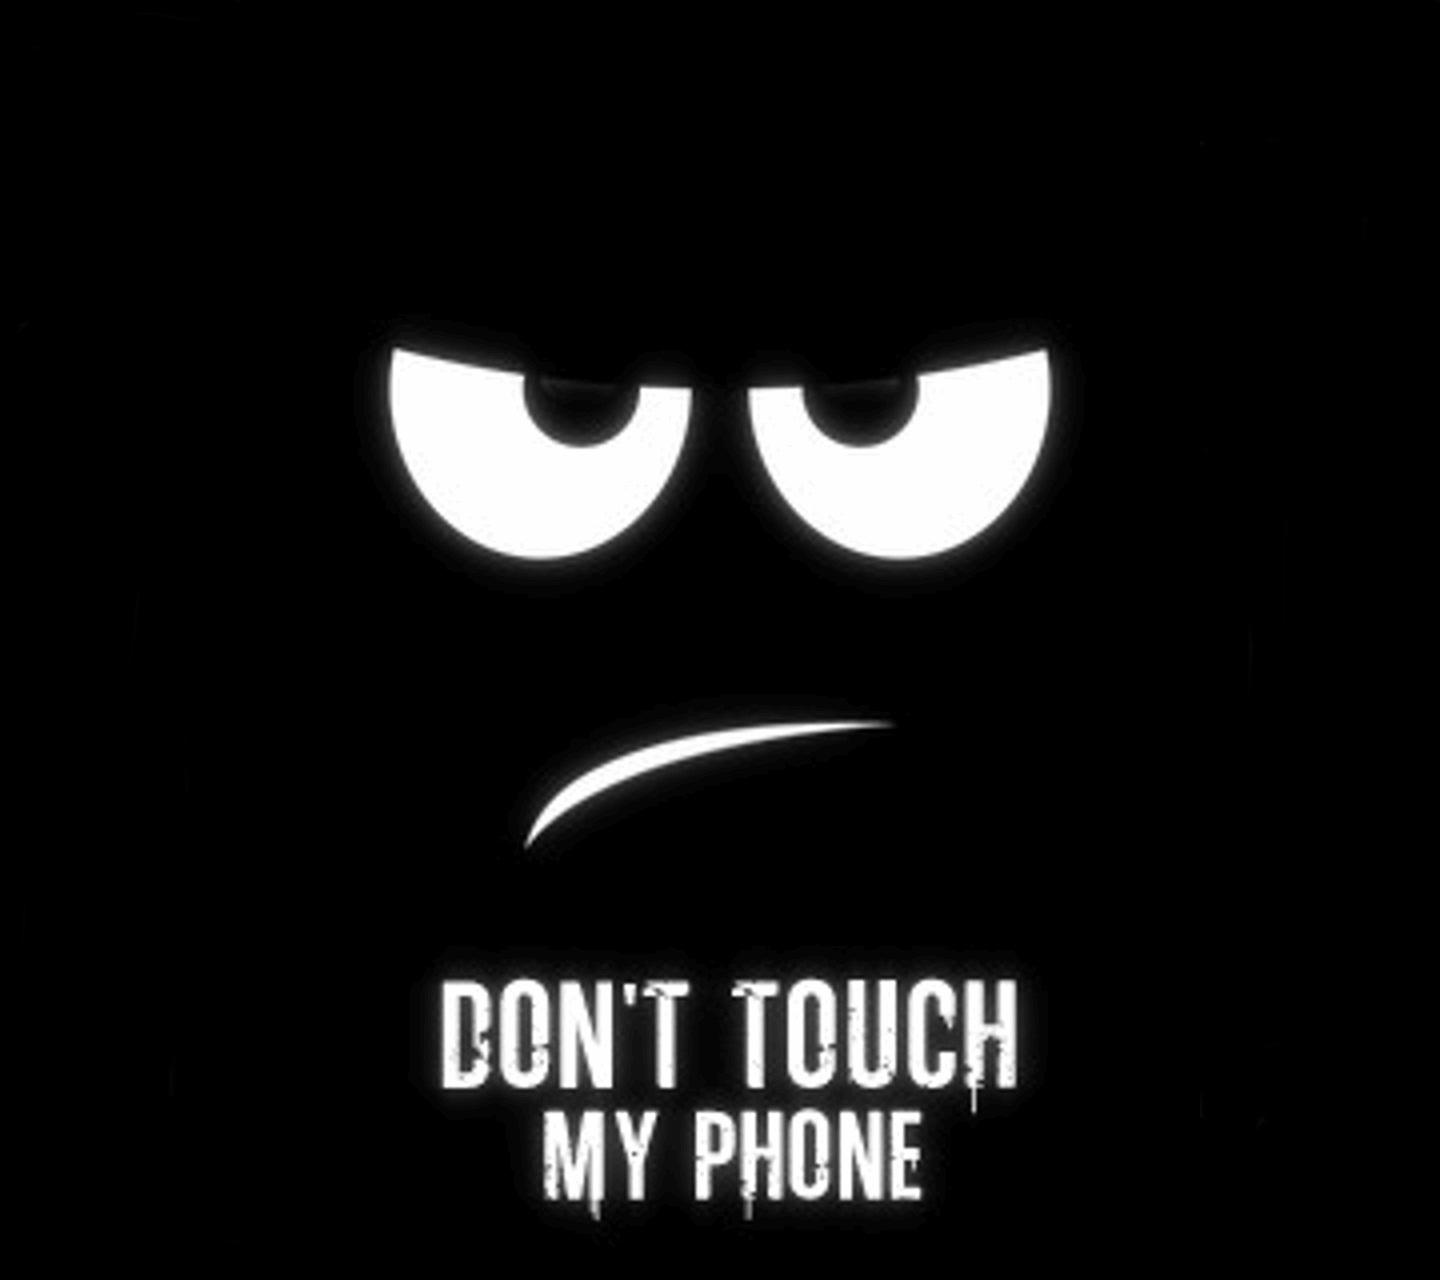 Don't Touch My Phone Wallpaper HD